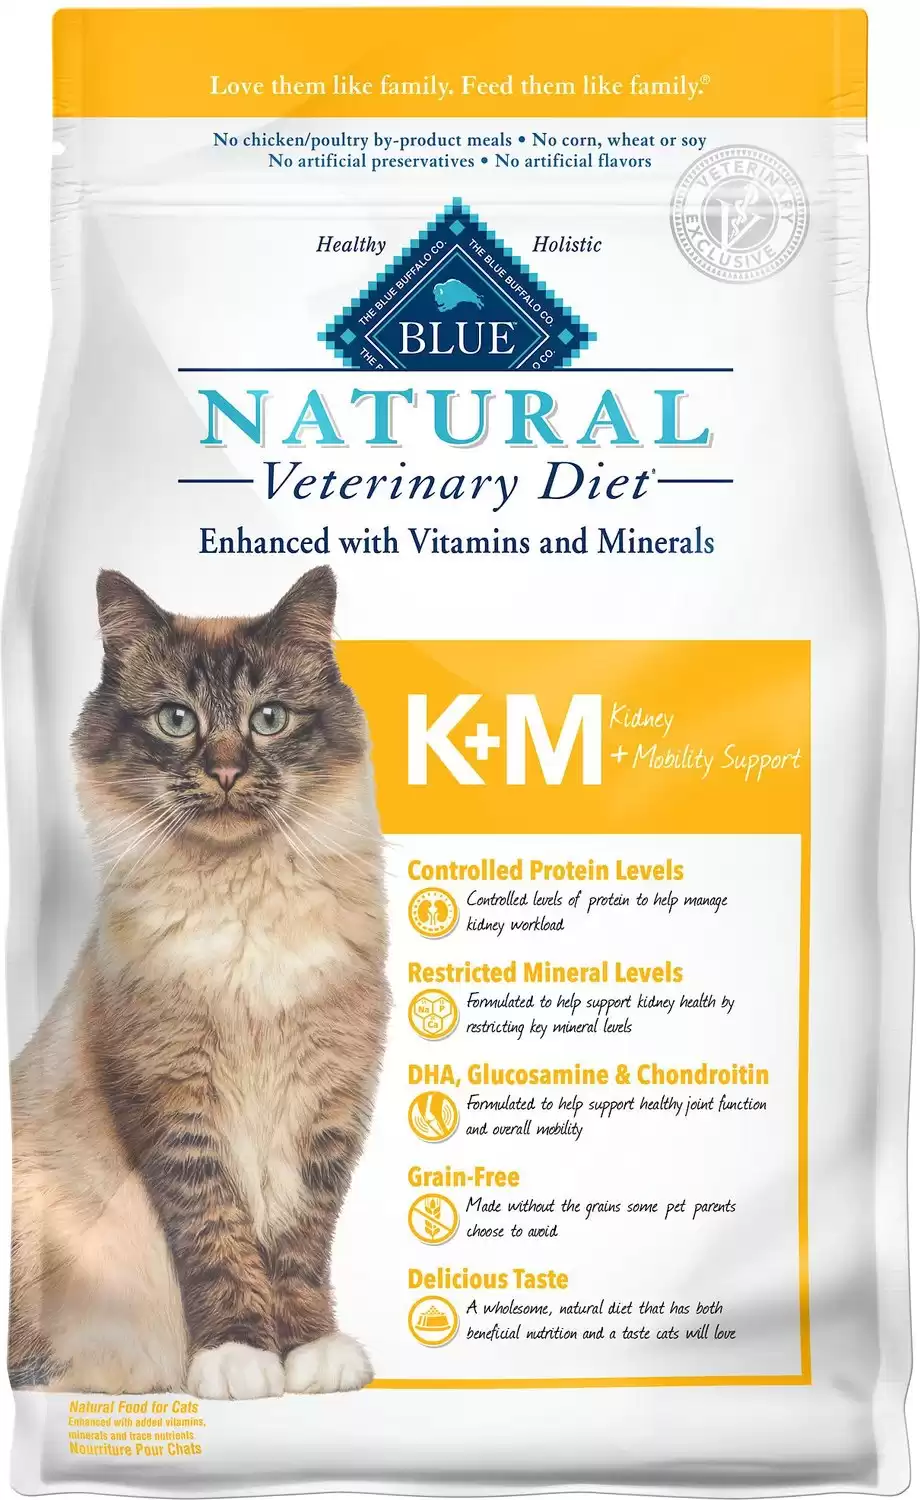 Blue Buffalo Natural Veterinary Diet K+M Kidney + Mobility Support